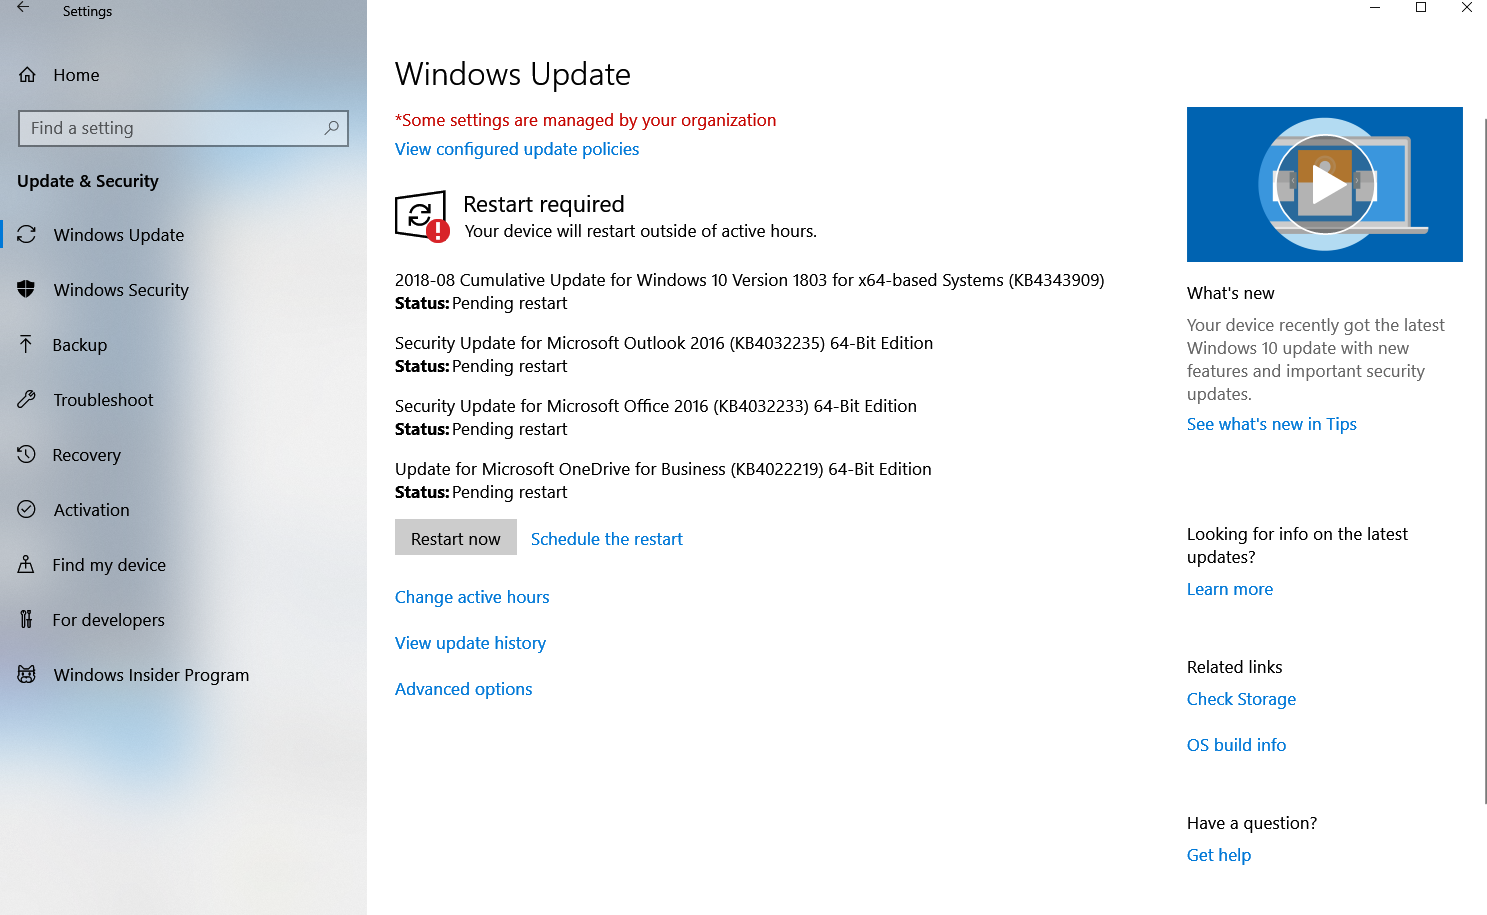 Windows update settings are managed by my organization 69a42b90-24e4-4b75-9083-9df4c1a3f767?upload=true.png